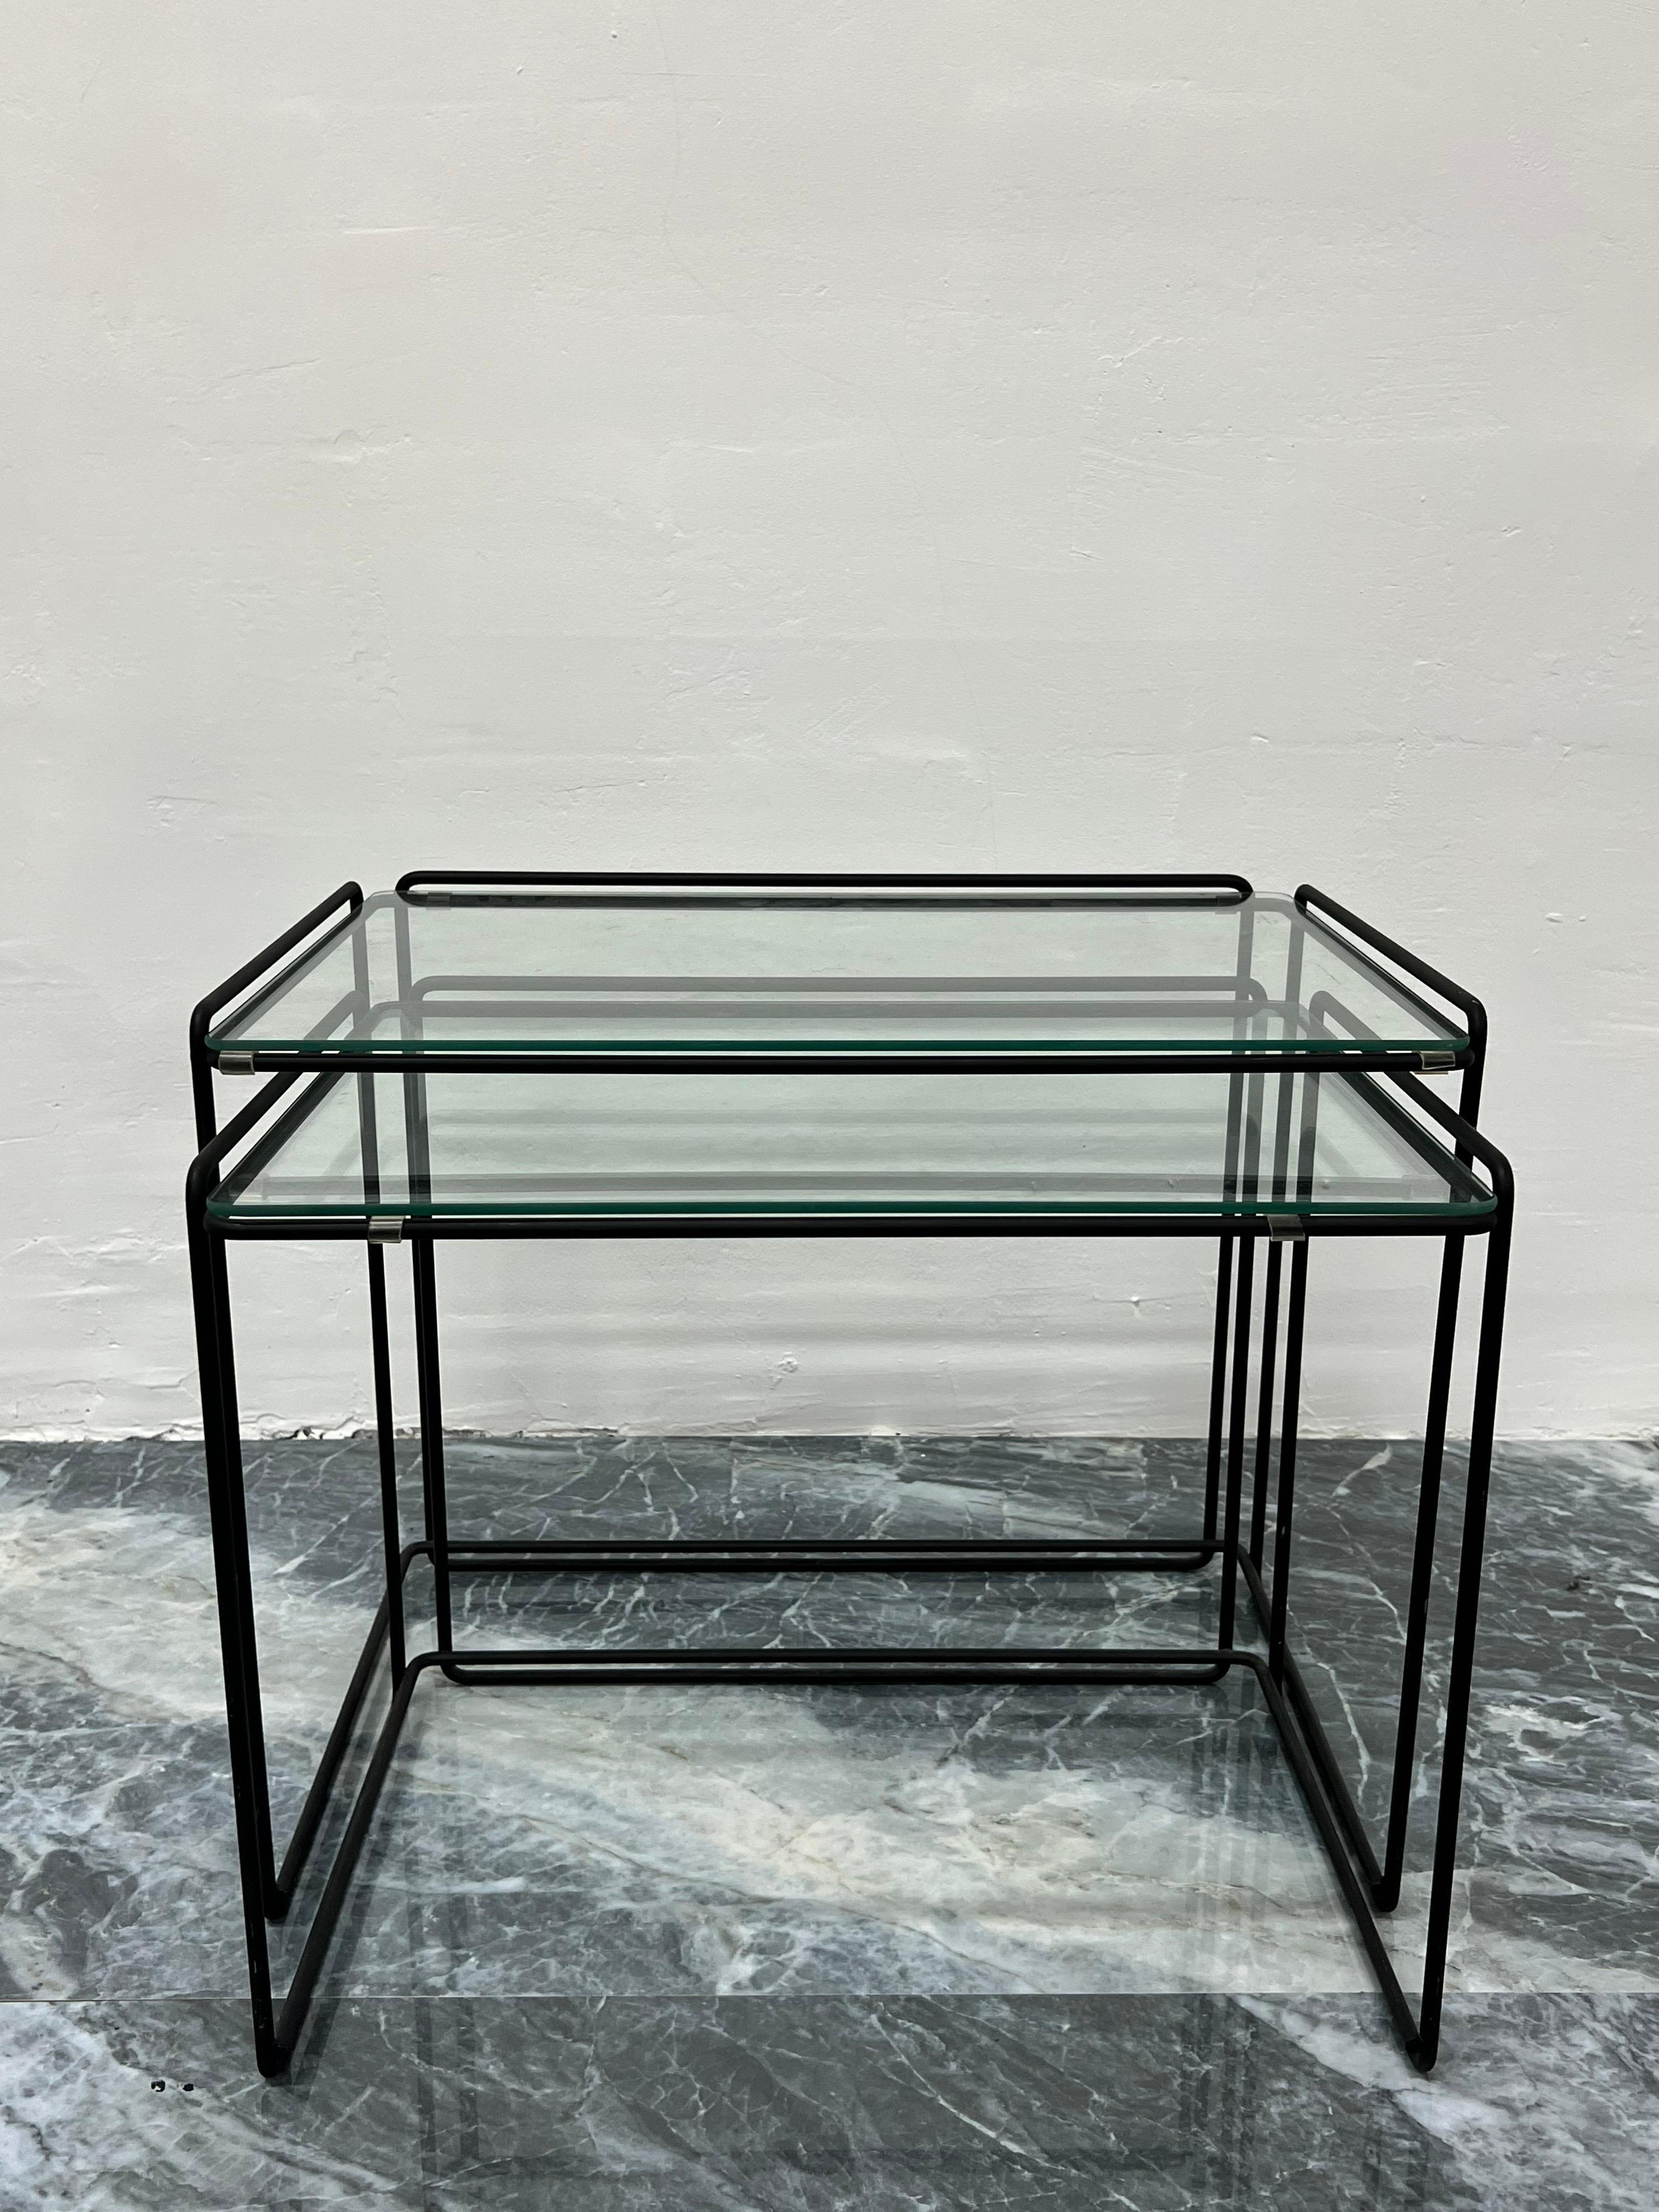 Set of two nesting tables designed by French artist Max Sauze and produced by Groupe S.A France, circa 1970. The structure is made of matte black steel rods and all tables retain their original clear glass.

Dimensions:
Large - W21.75